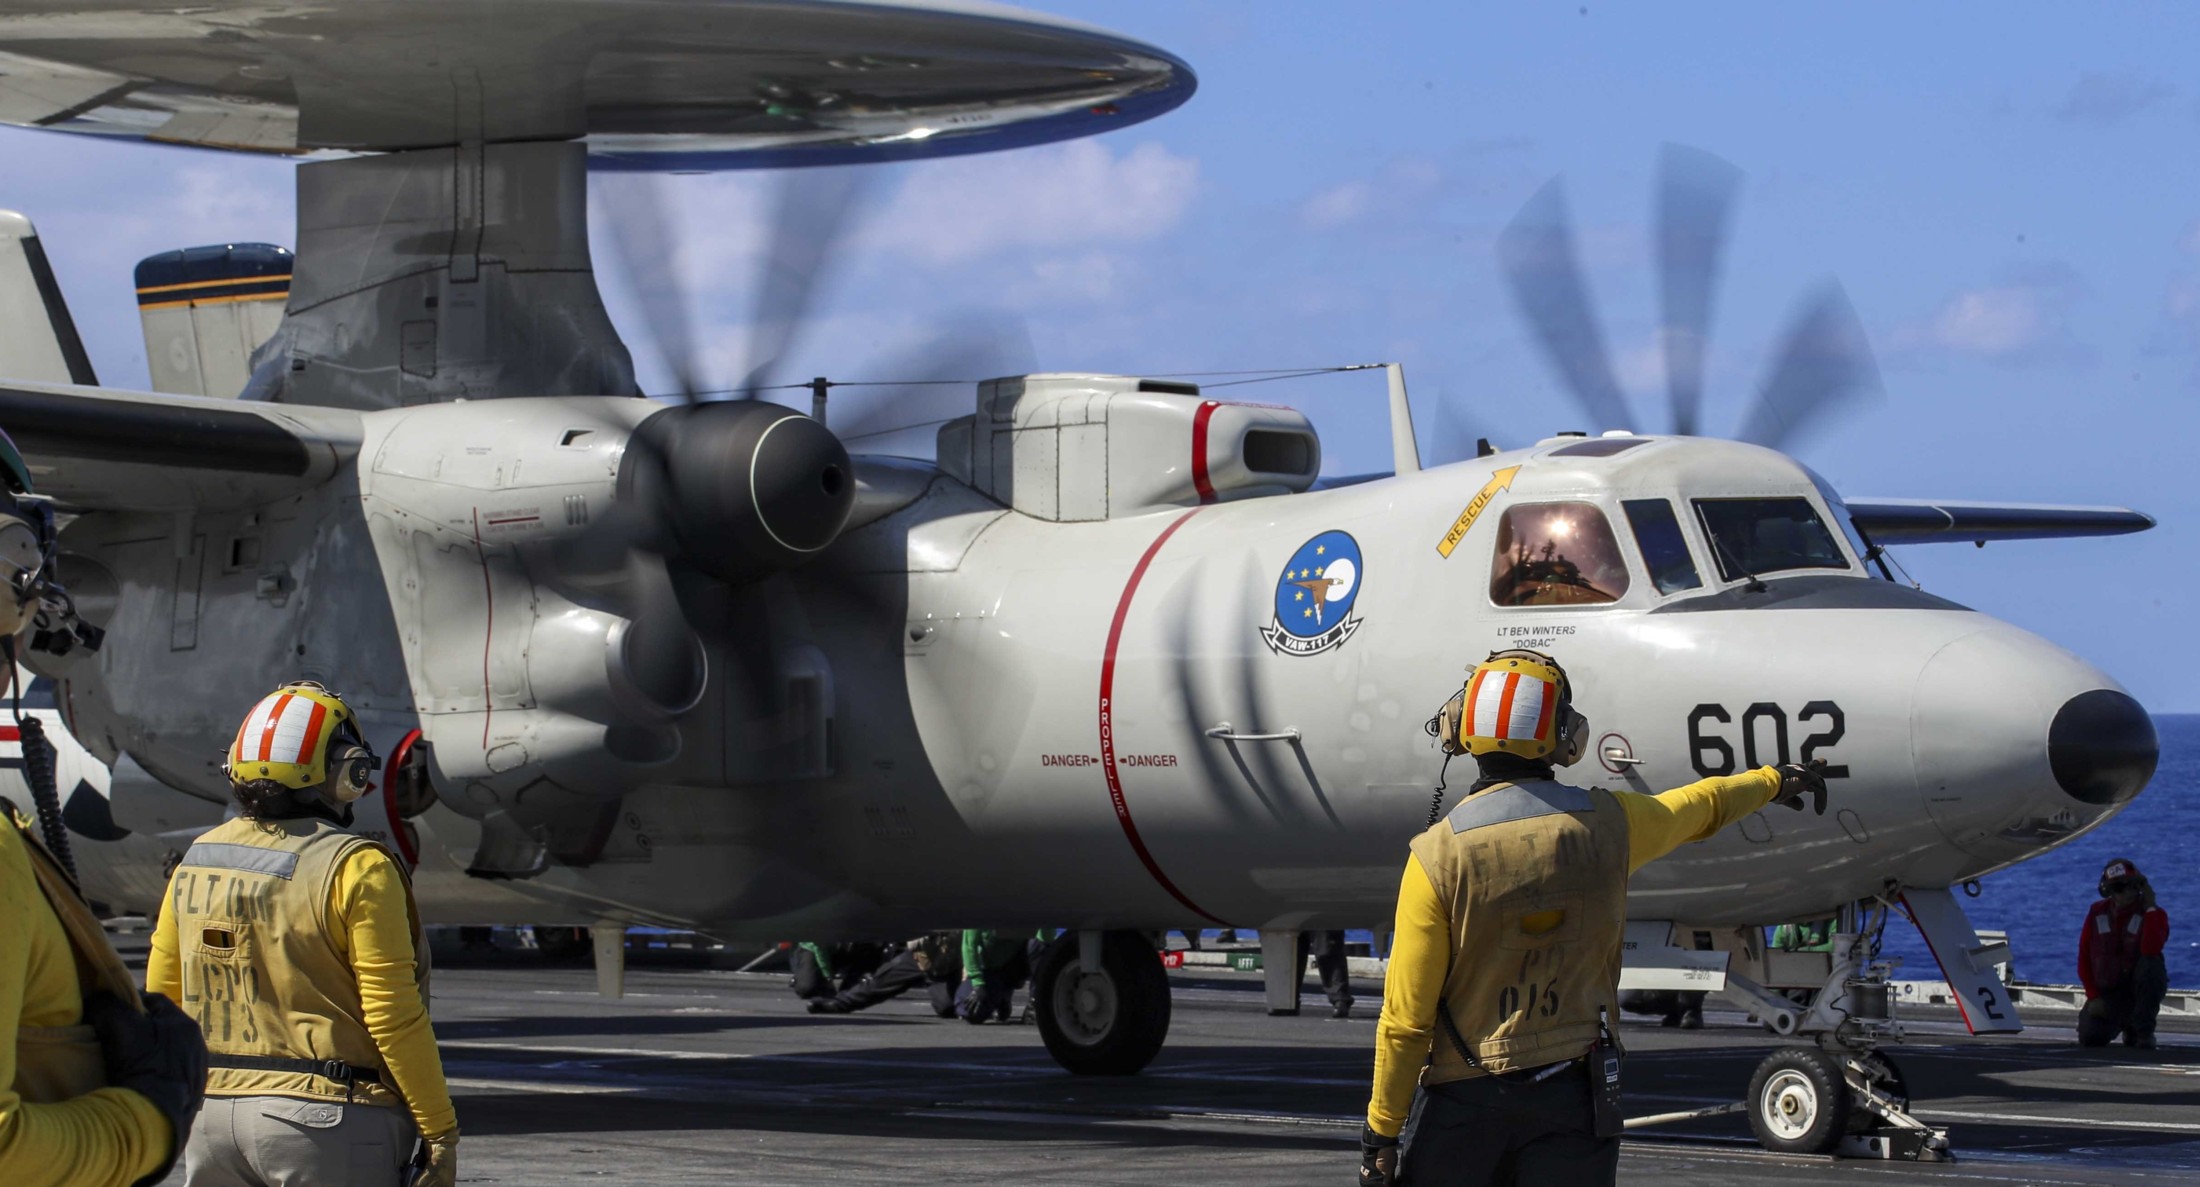 vaw-117 wallbangers airborne command and control squadron navy e-2d hawkeye cvw-9 uss abraham lincoln cvn-72 30